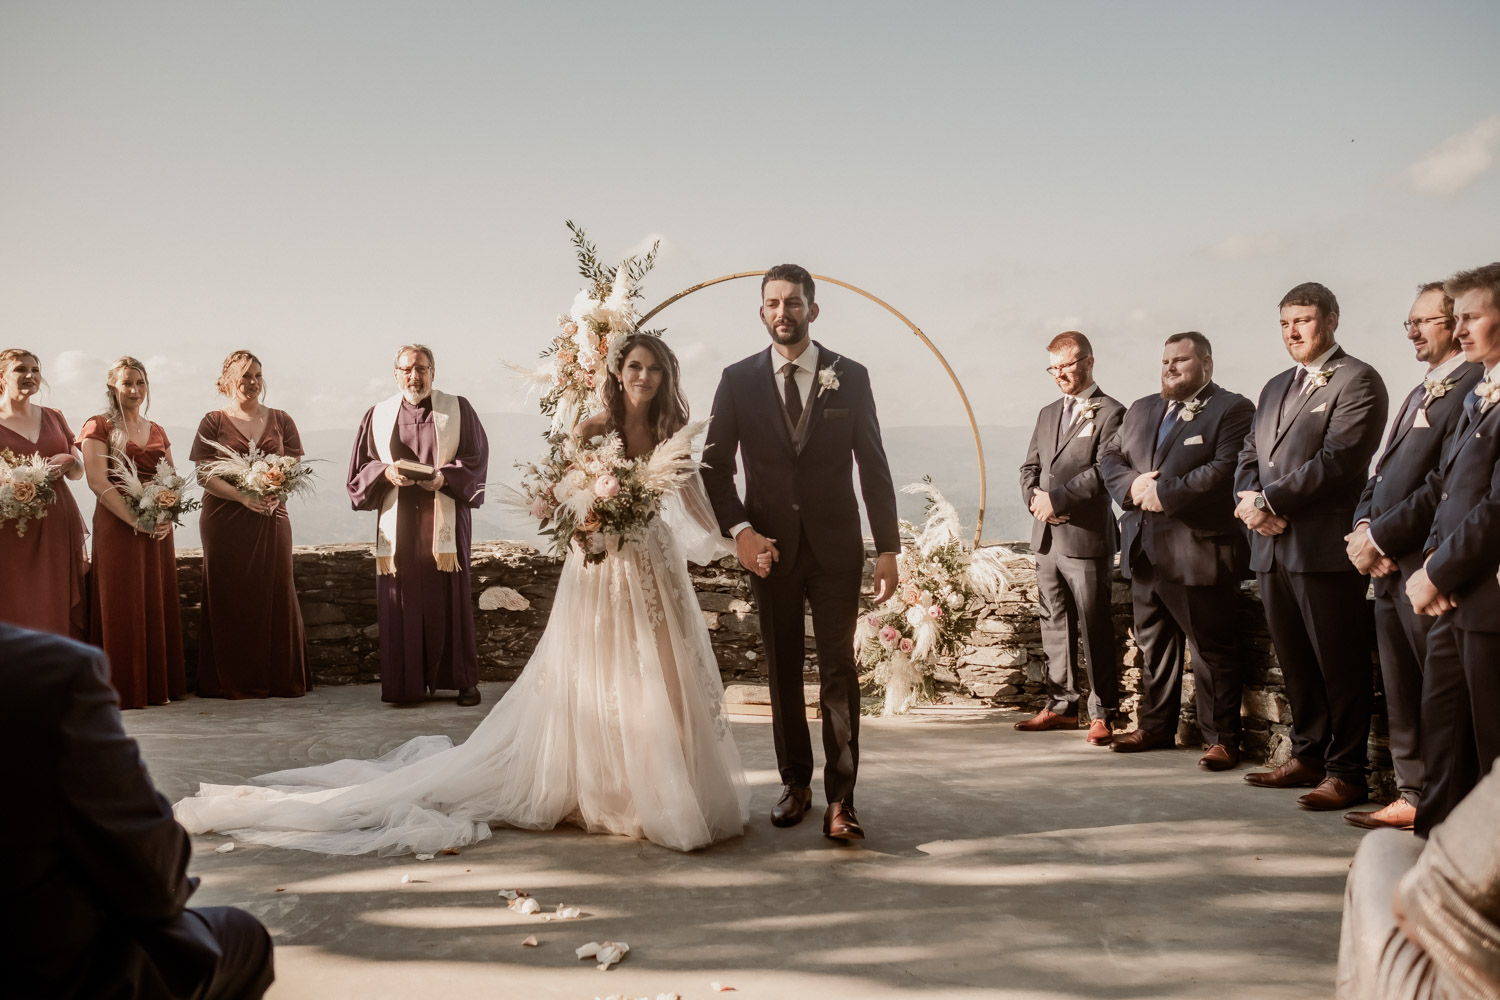 couple getting married overlooking the mountains with flowers and archway